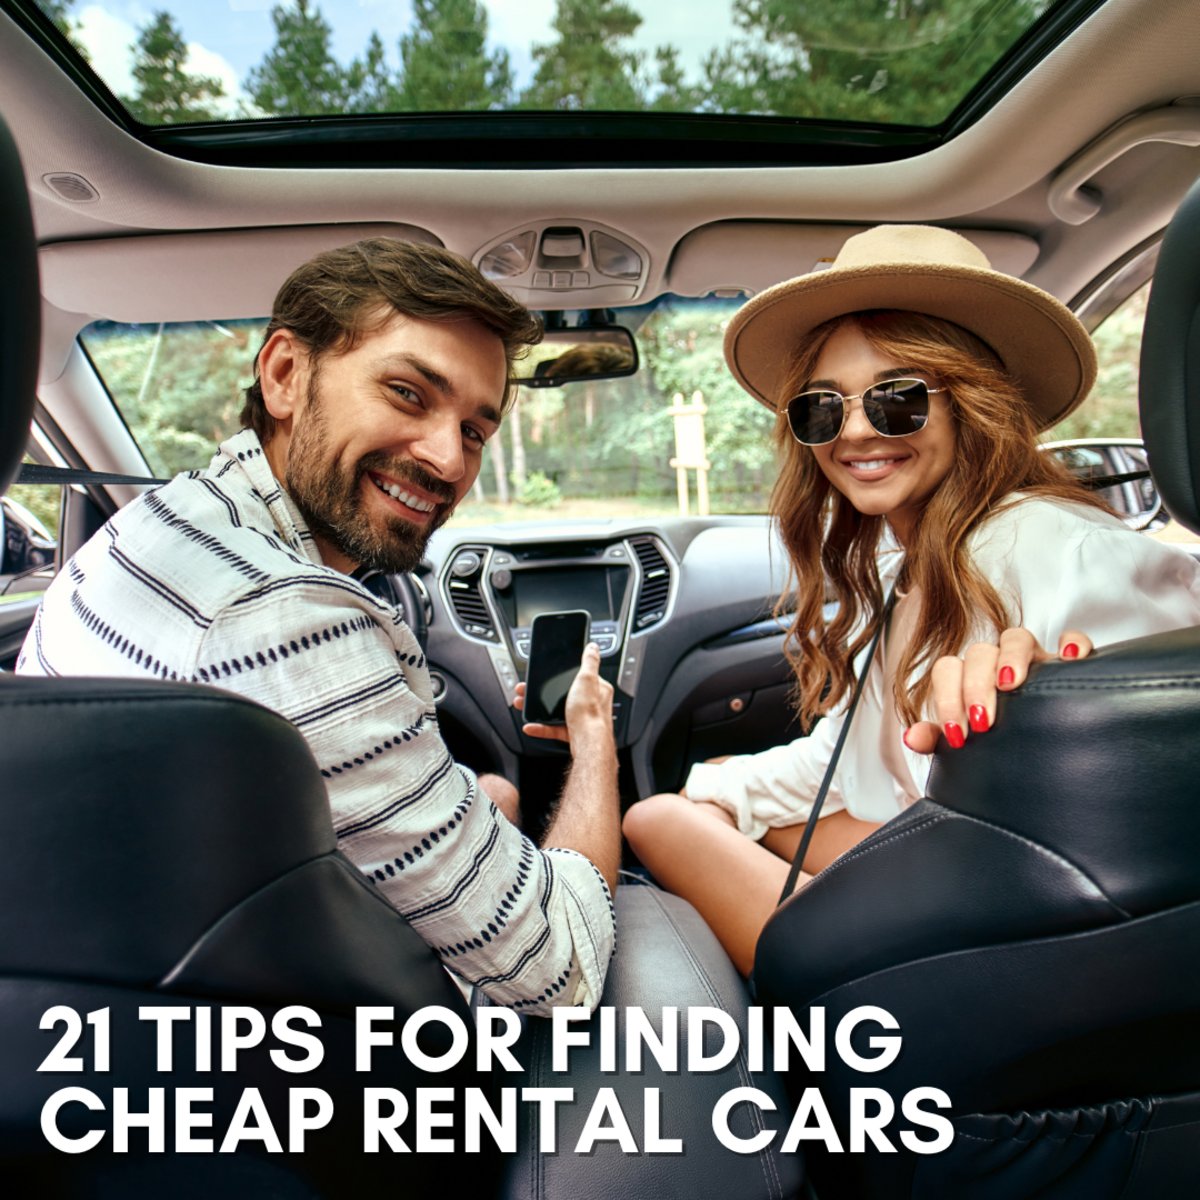 Planning on hitting the open road on your way to Astoria? 🚗 Read these 21 tips for scoring sweet deals on #rentalcars so that you can explore without breaking the bank. bit.ly/3uBCqBJ #roadtrip #savvytraveler